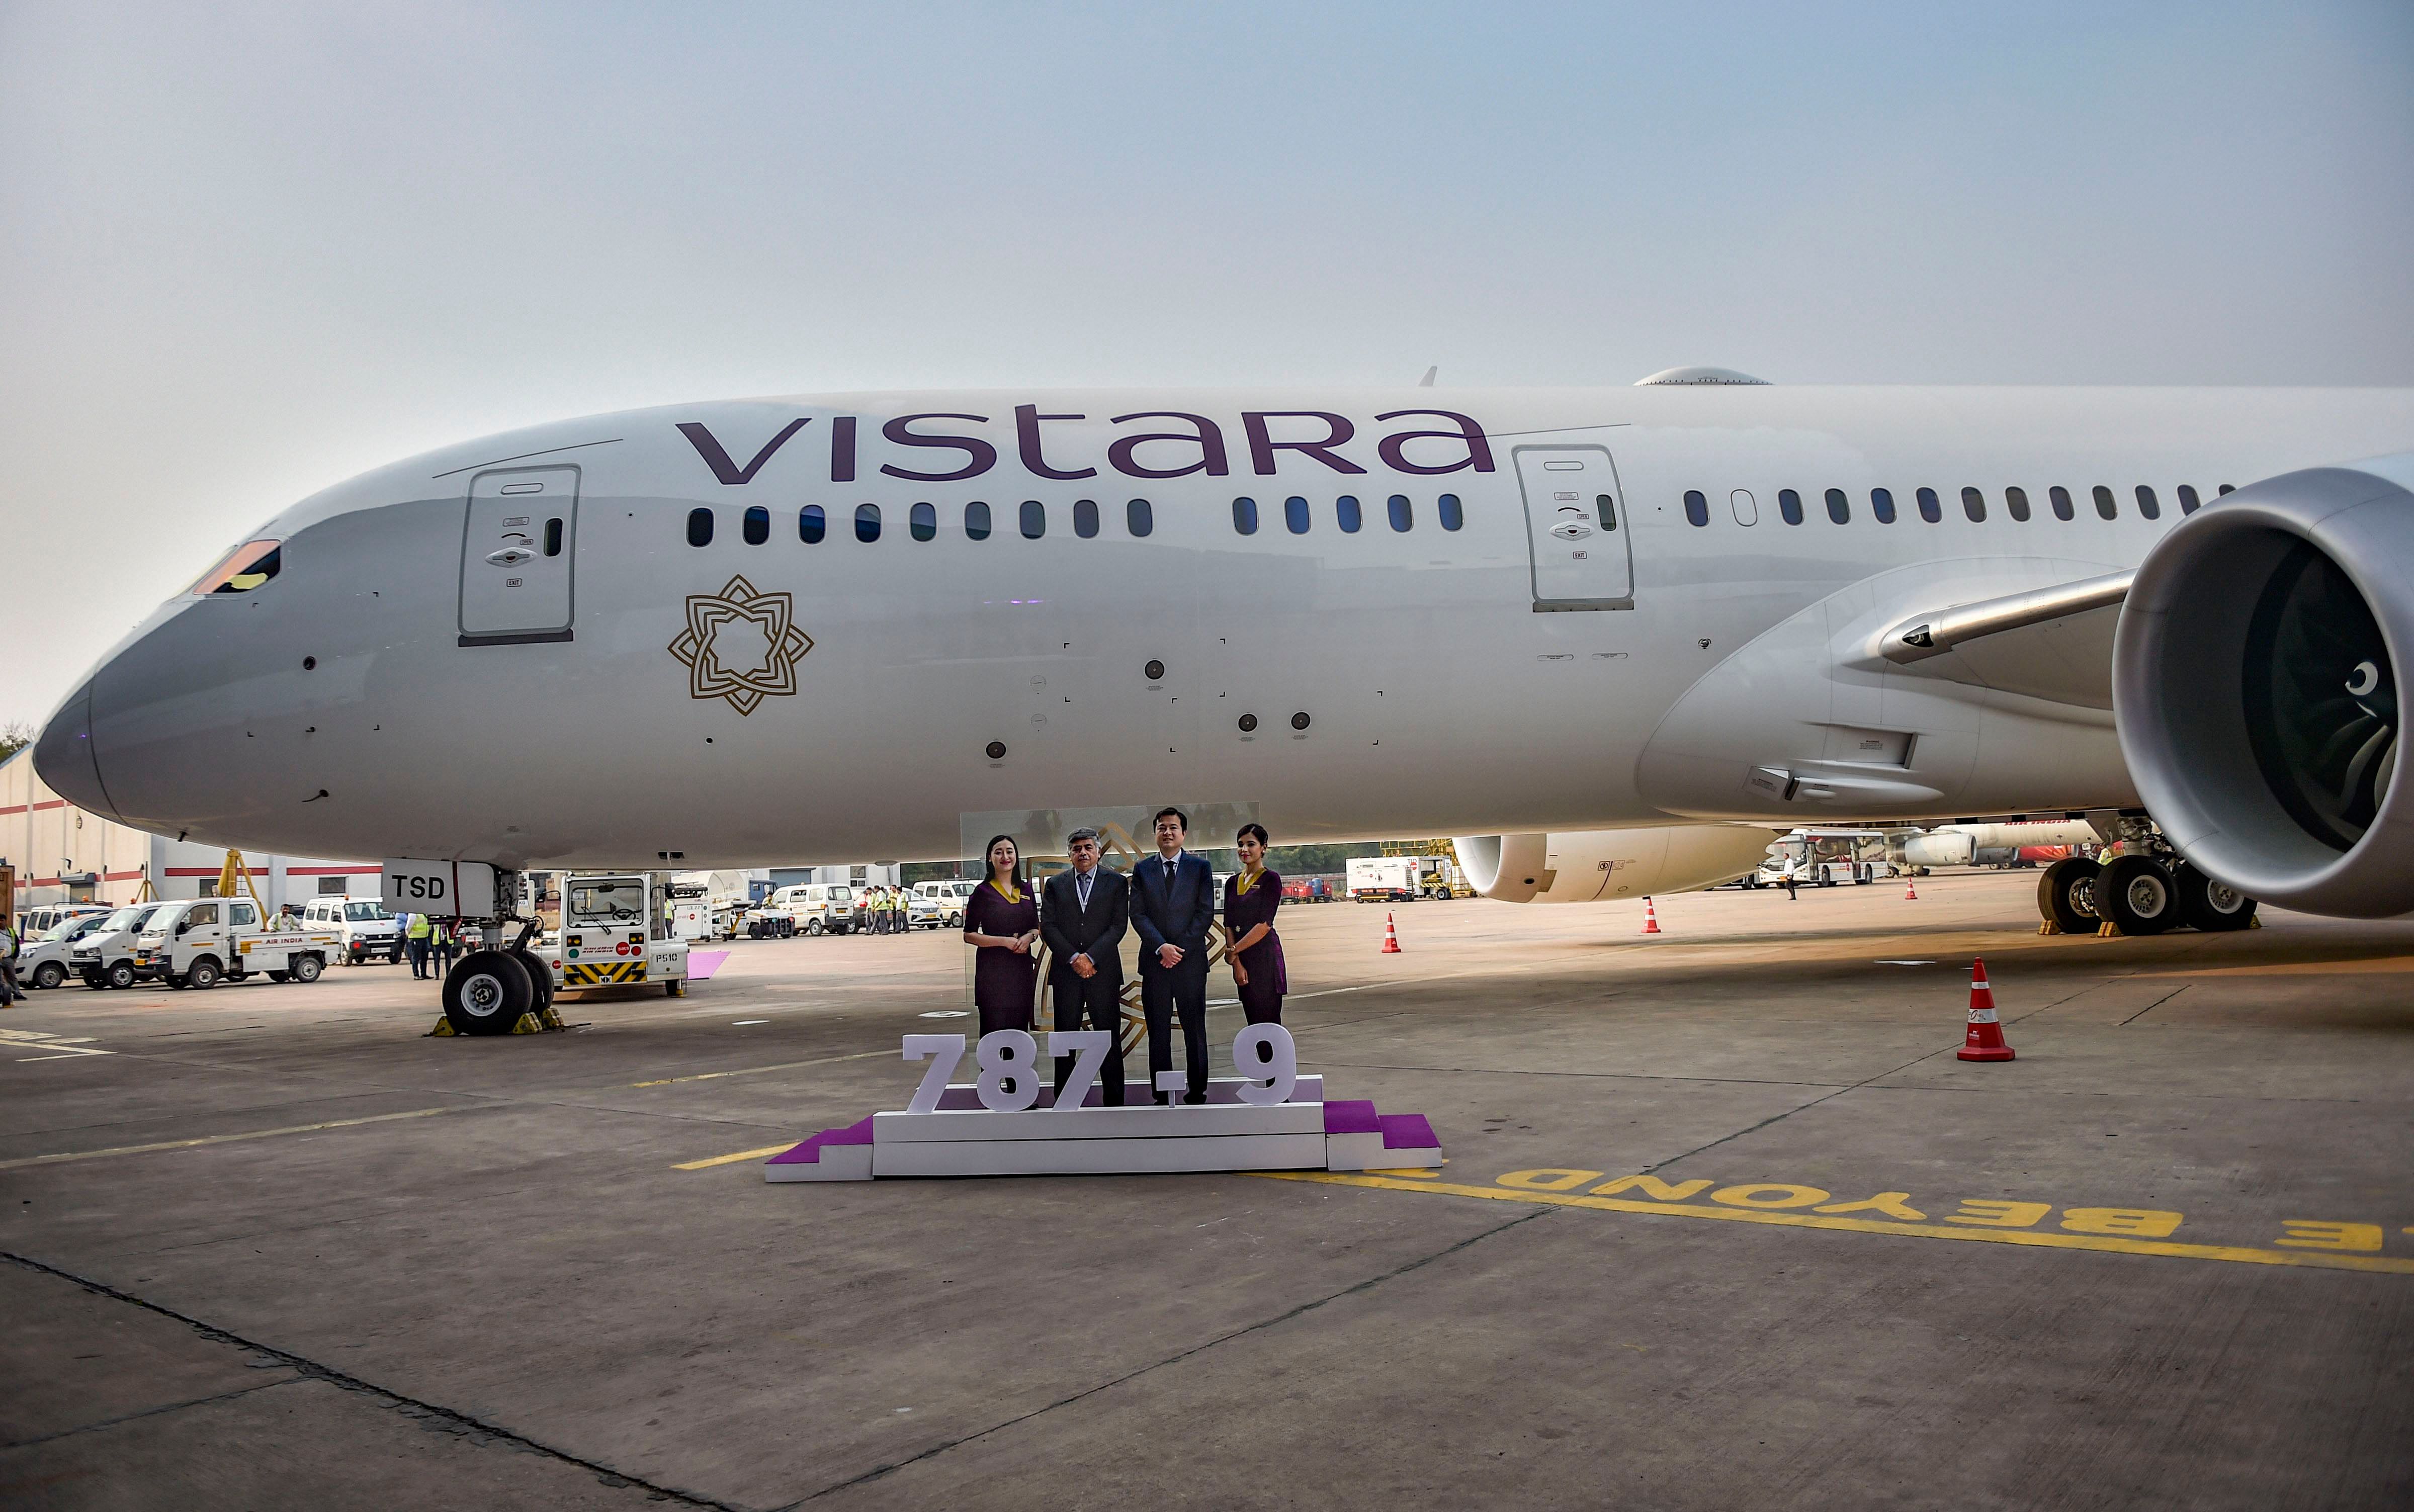 The arrival of the long-haul aircraft for Vistara comes at a time when the aviation industry is battling concerns of significantly lower demand in the coming months. (Credit: PTI Photo)